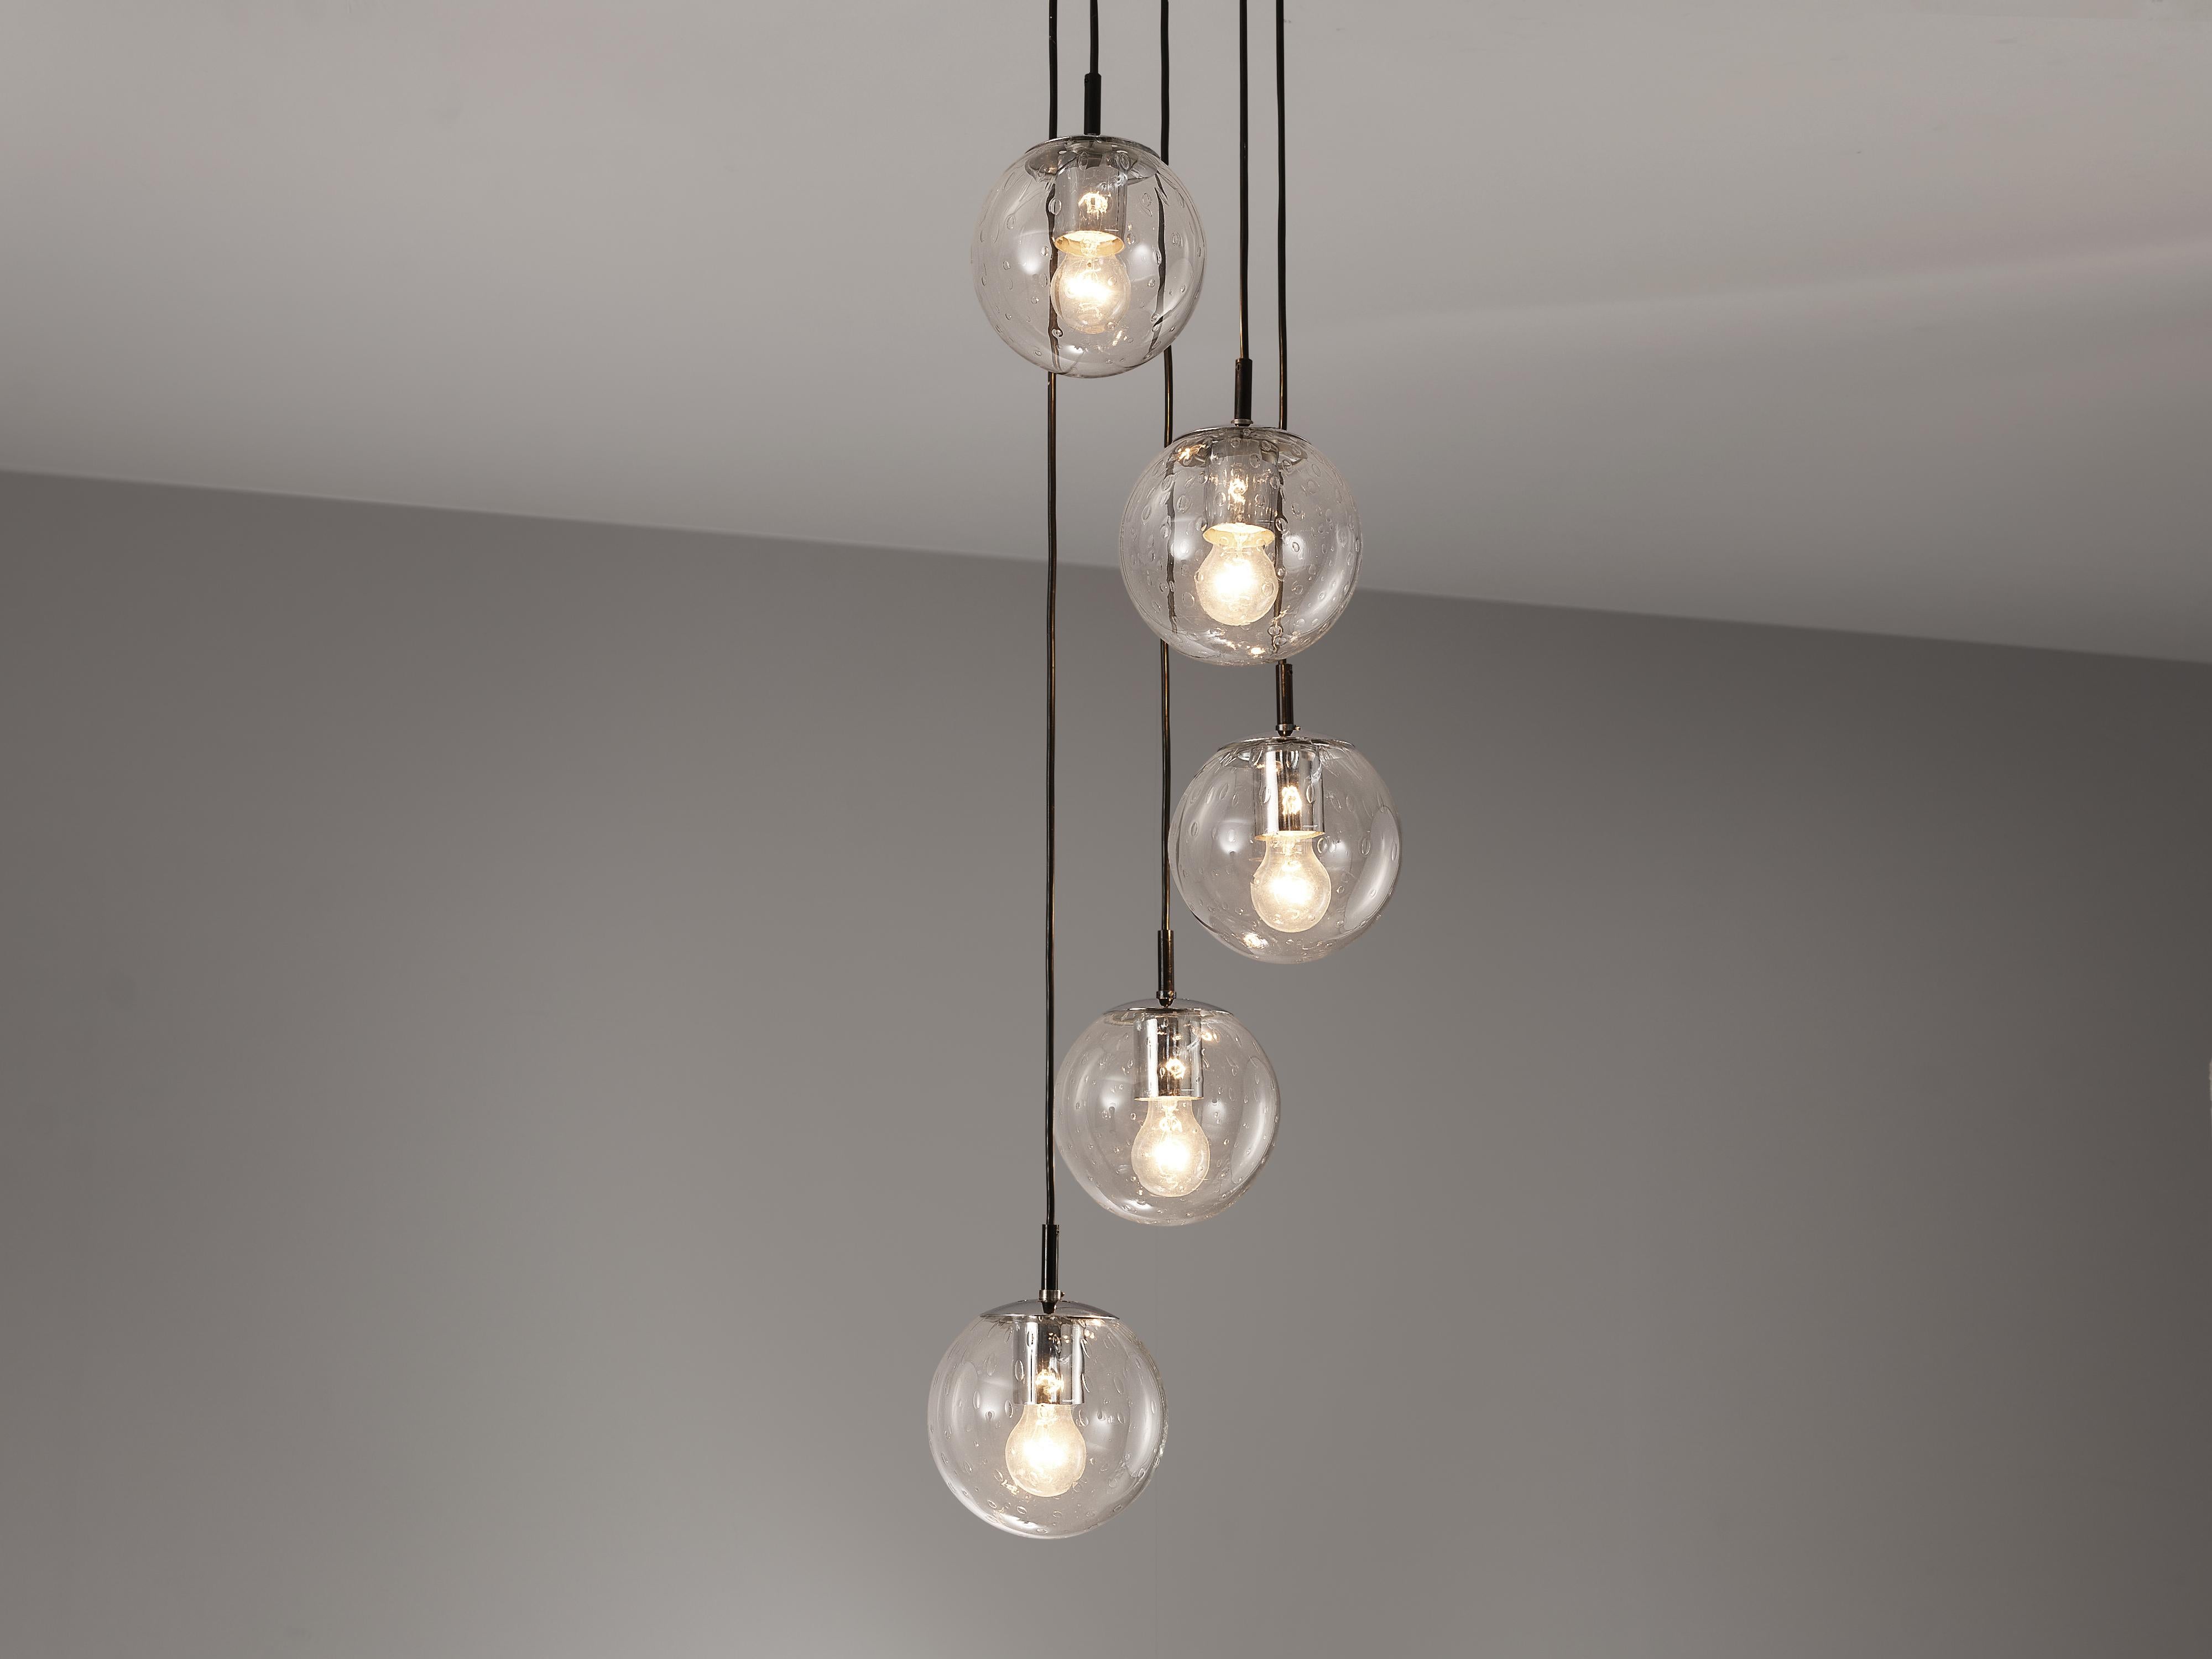 RAAK Amsterdam, pendant with five 'Bubble' spheres, glass, chrome-plated metal, The Netherlands, 1960s 

A sophisticated composition of five hand-blown glass pendants is created by the Dutch manufacturer RAAK Amsterdam. As a result of the hand-blown